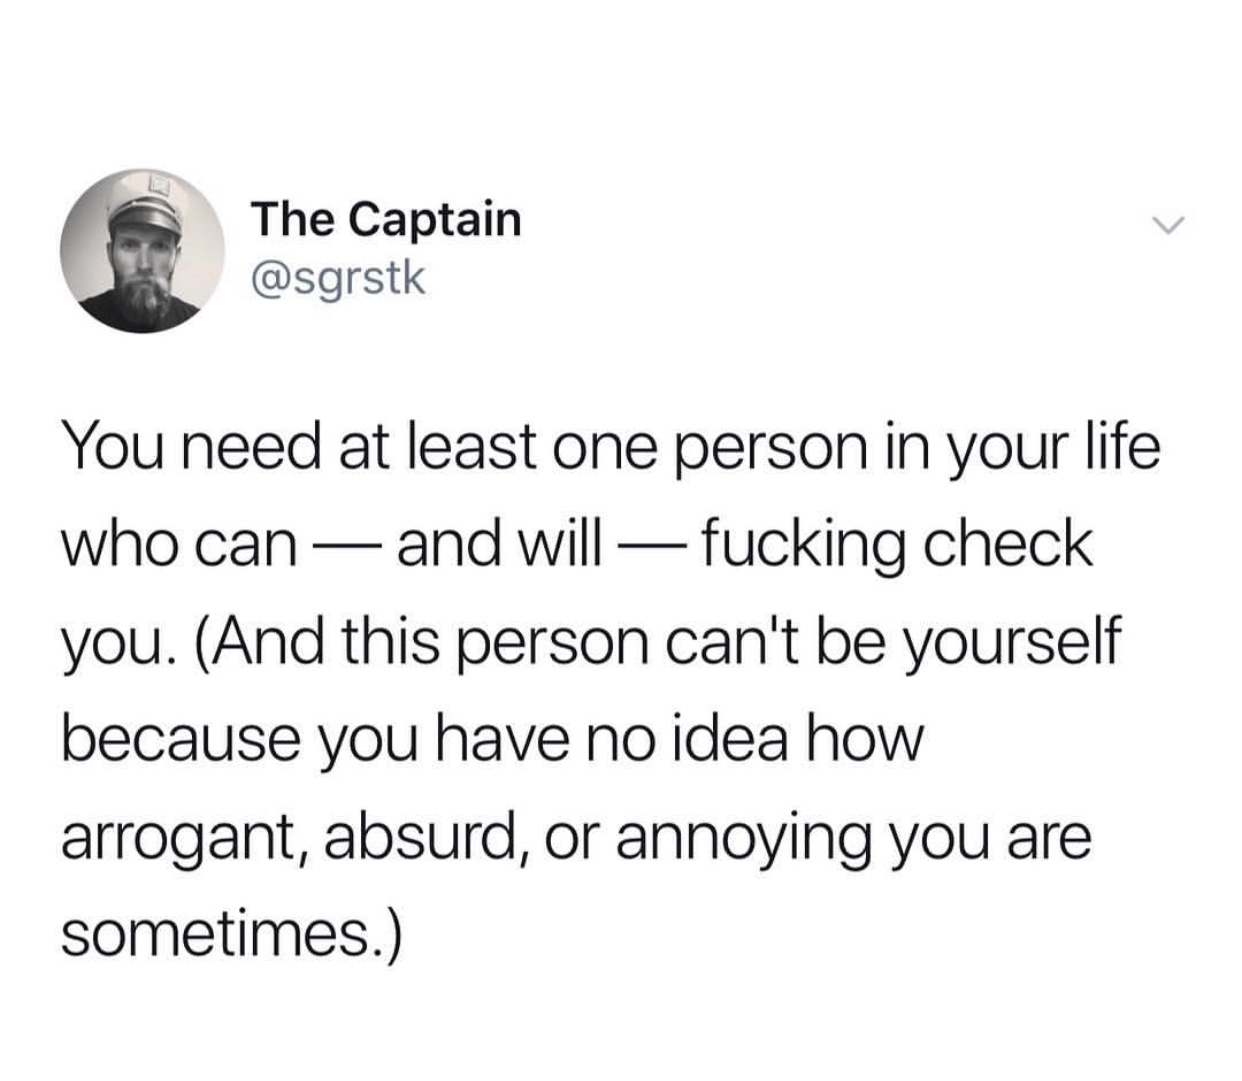 middle school relationships memes - The Captain You need at least one person in your life who can and will fucking check you. And this person can't be yourself because you have no idea how arrogant, absurd, or annoying you are sometimes.